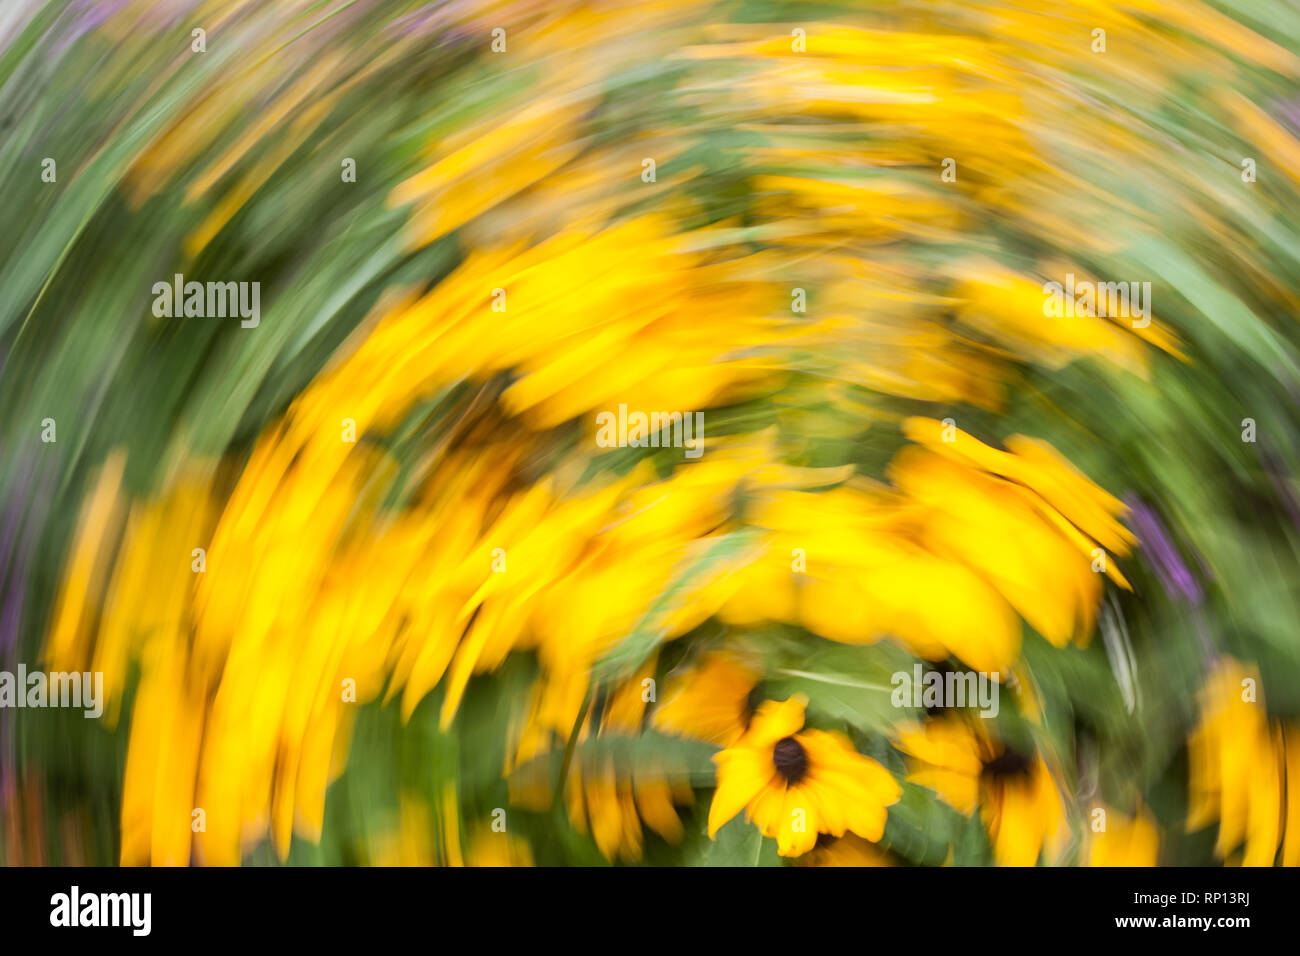 Abstract blurred photo in motion of bright yellow Rudbeckia Fulgida cone flowers with dark brown capitula are blossoming in the garden at summer. Stock Photo